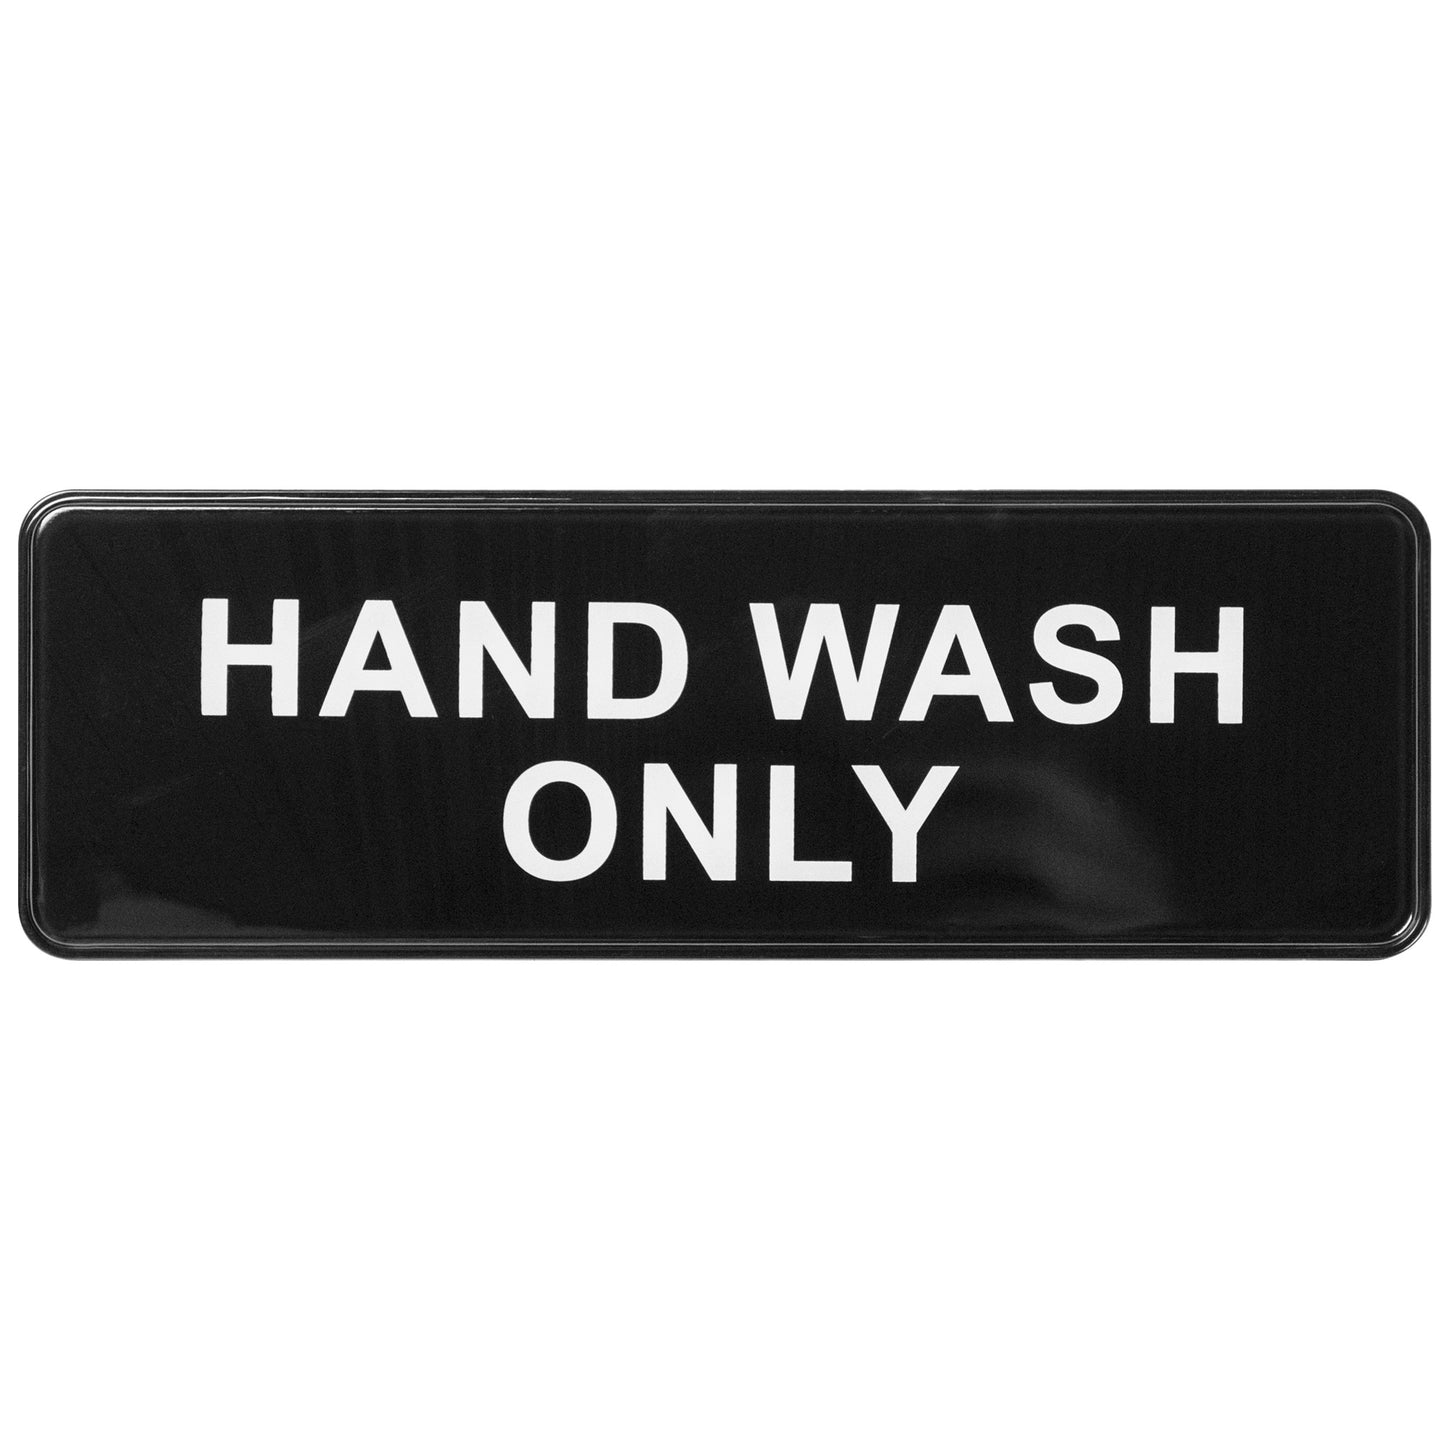 SGN-303 - Information Signs, 9"W x 3"H - SGN-303 - Hand Wash Only